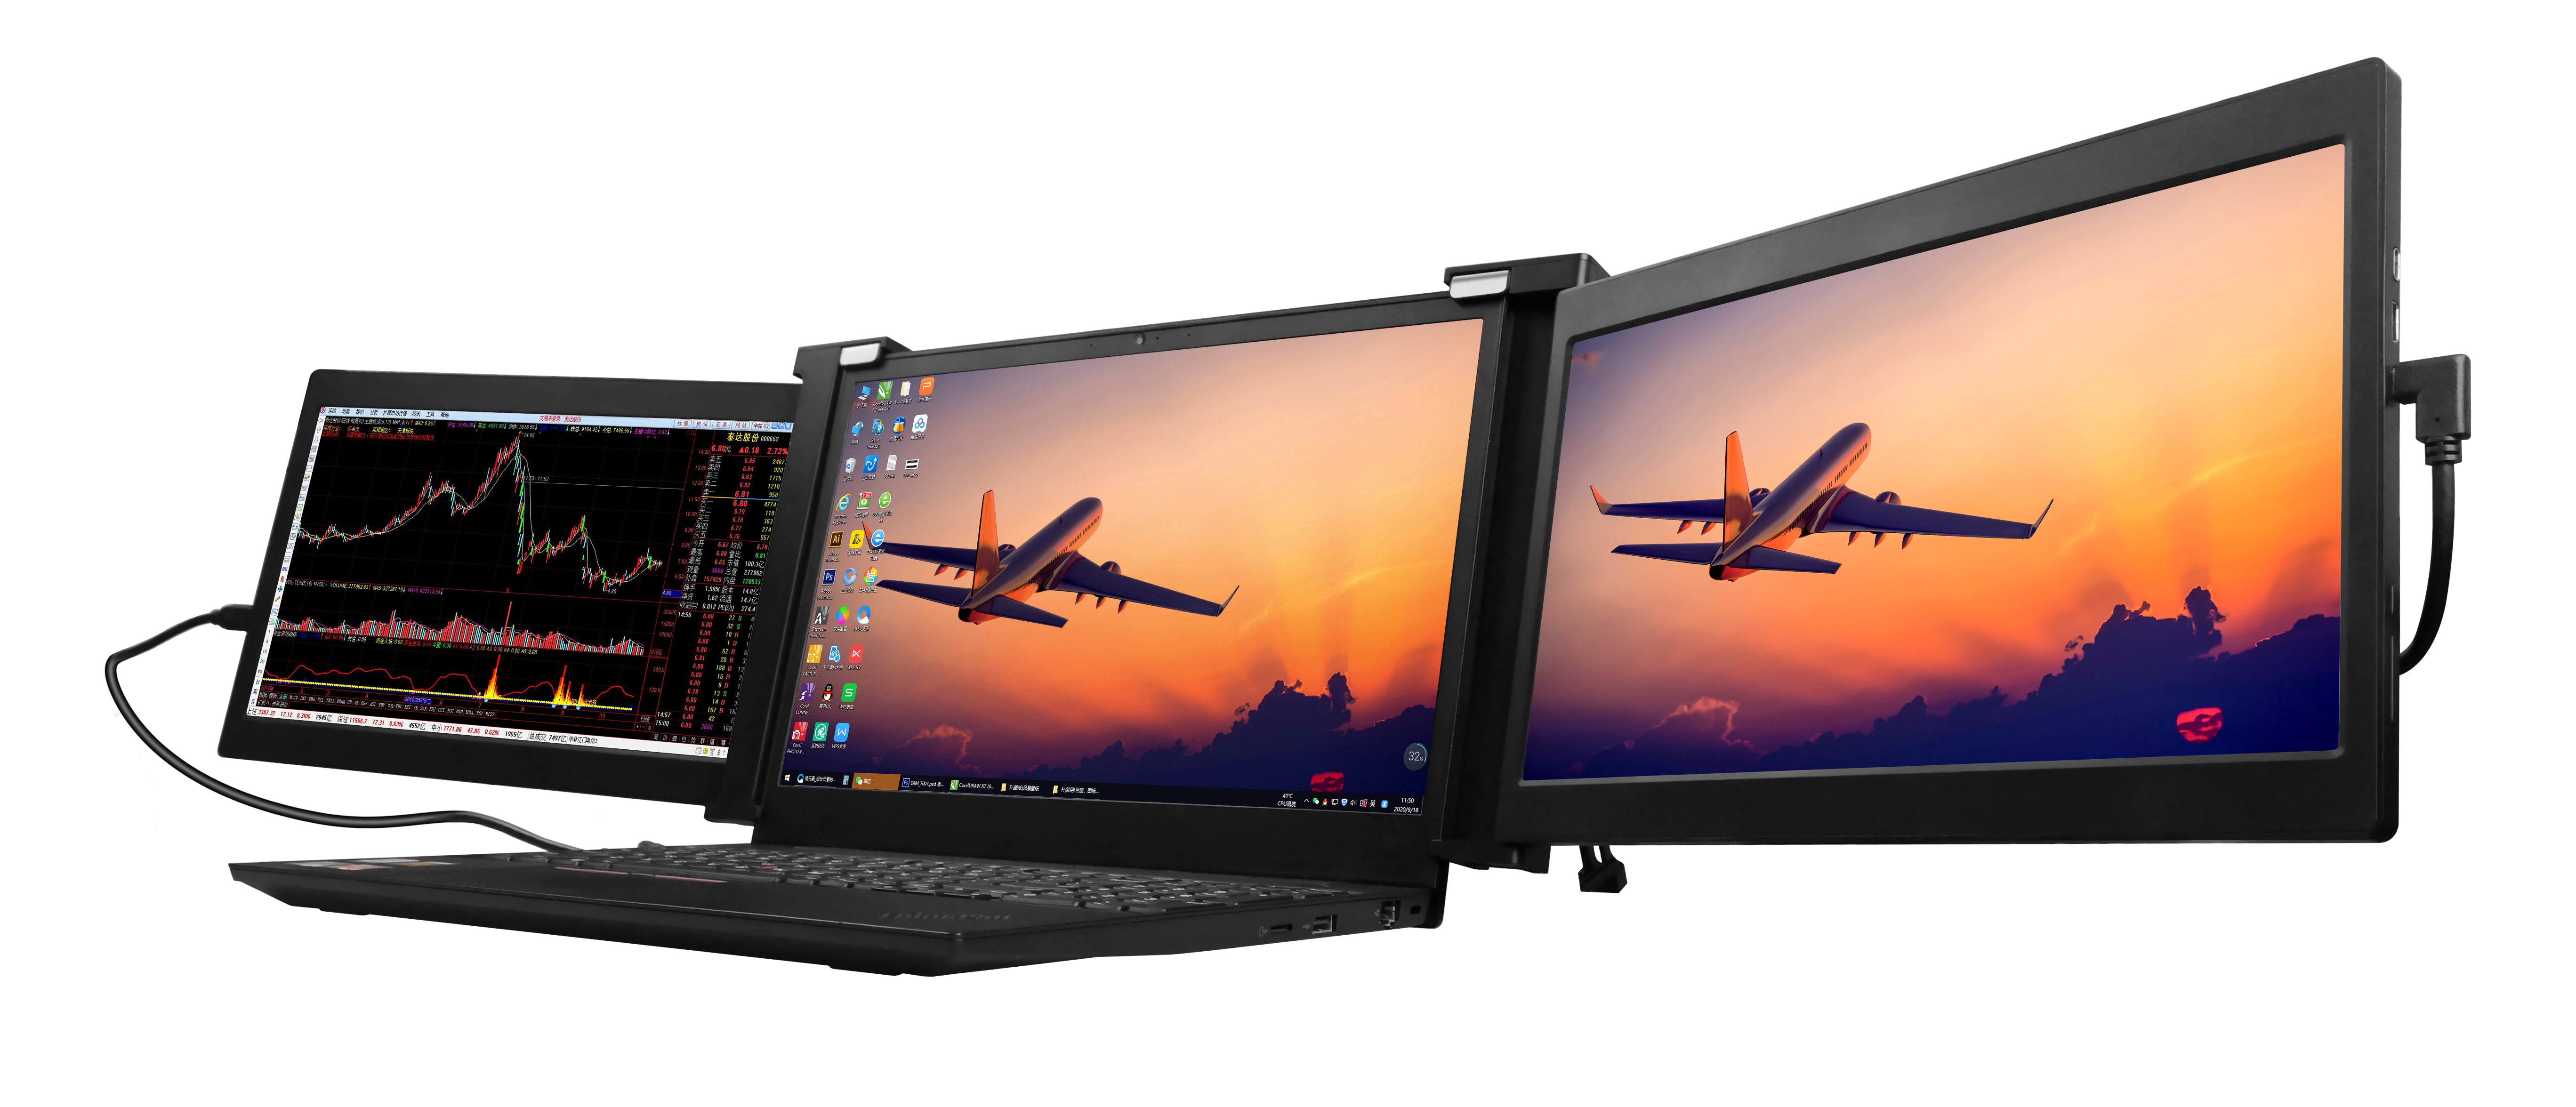 13,3" Portable Dual Screens Turn's your Laptop Into a Triple Screens Work Station.